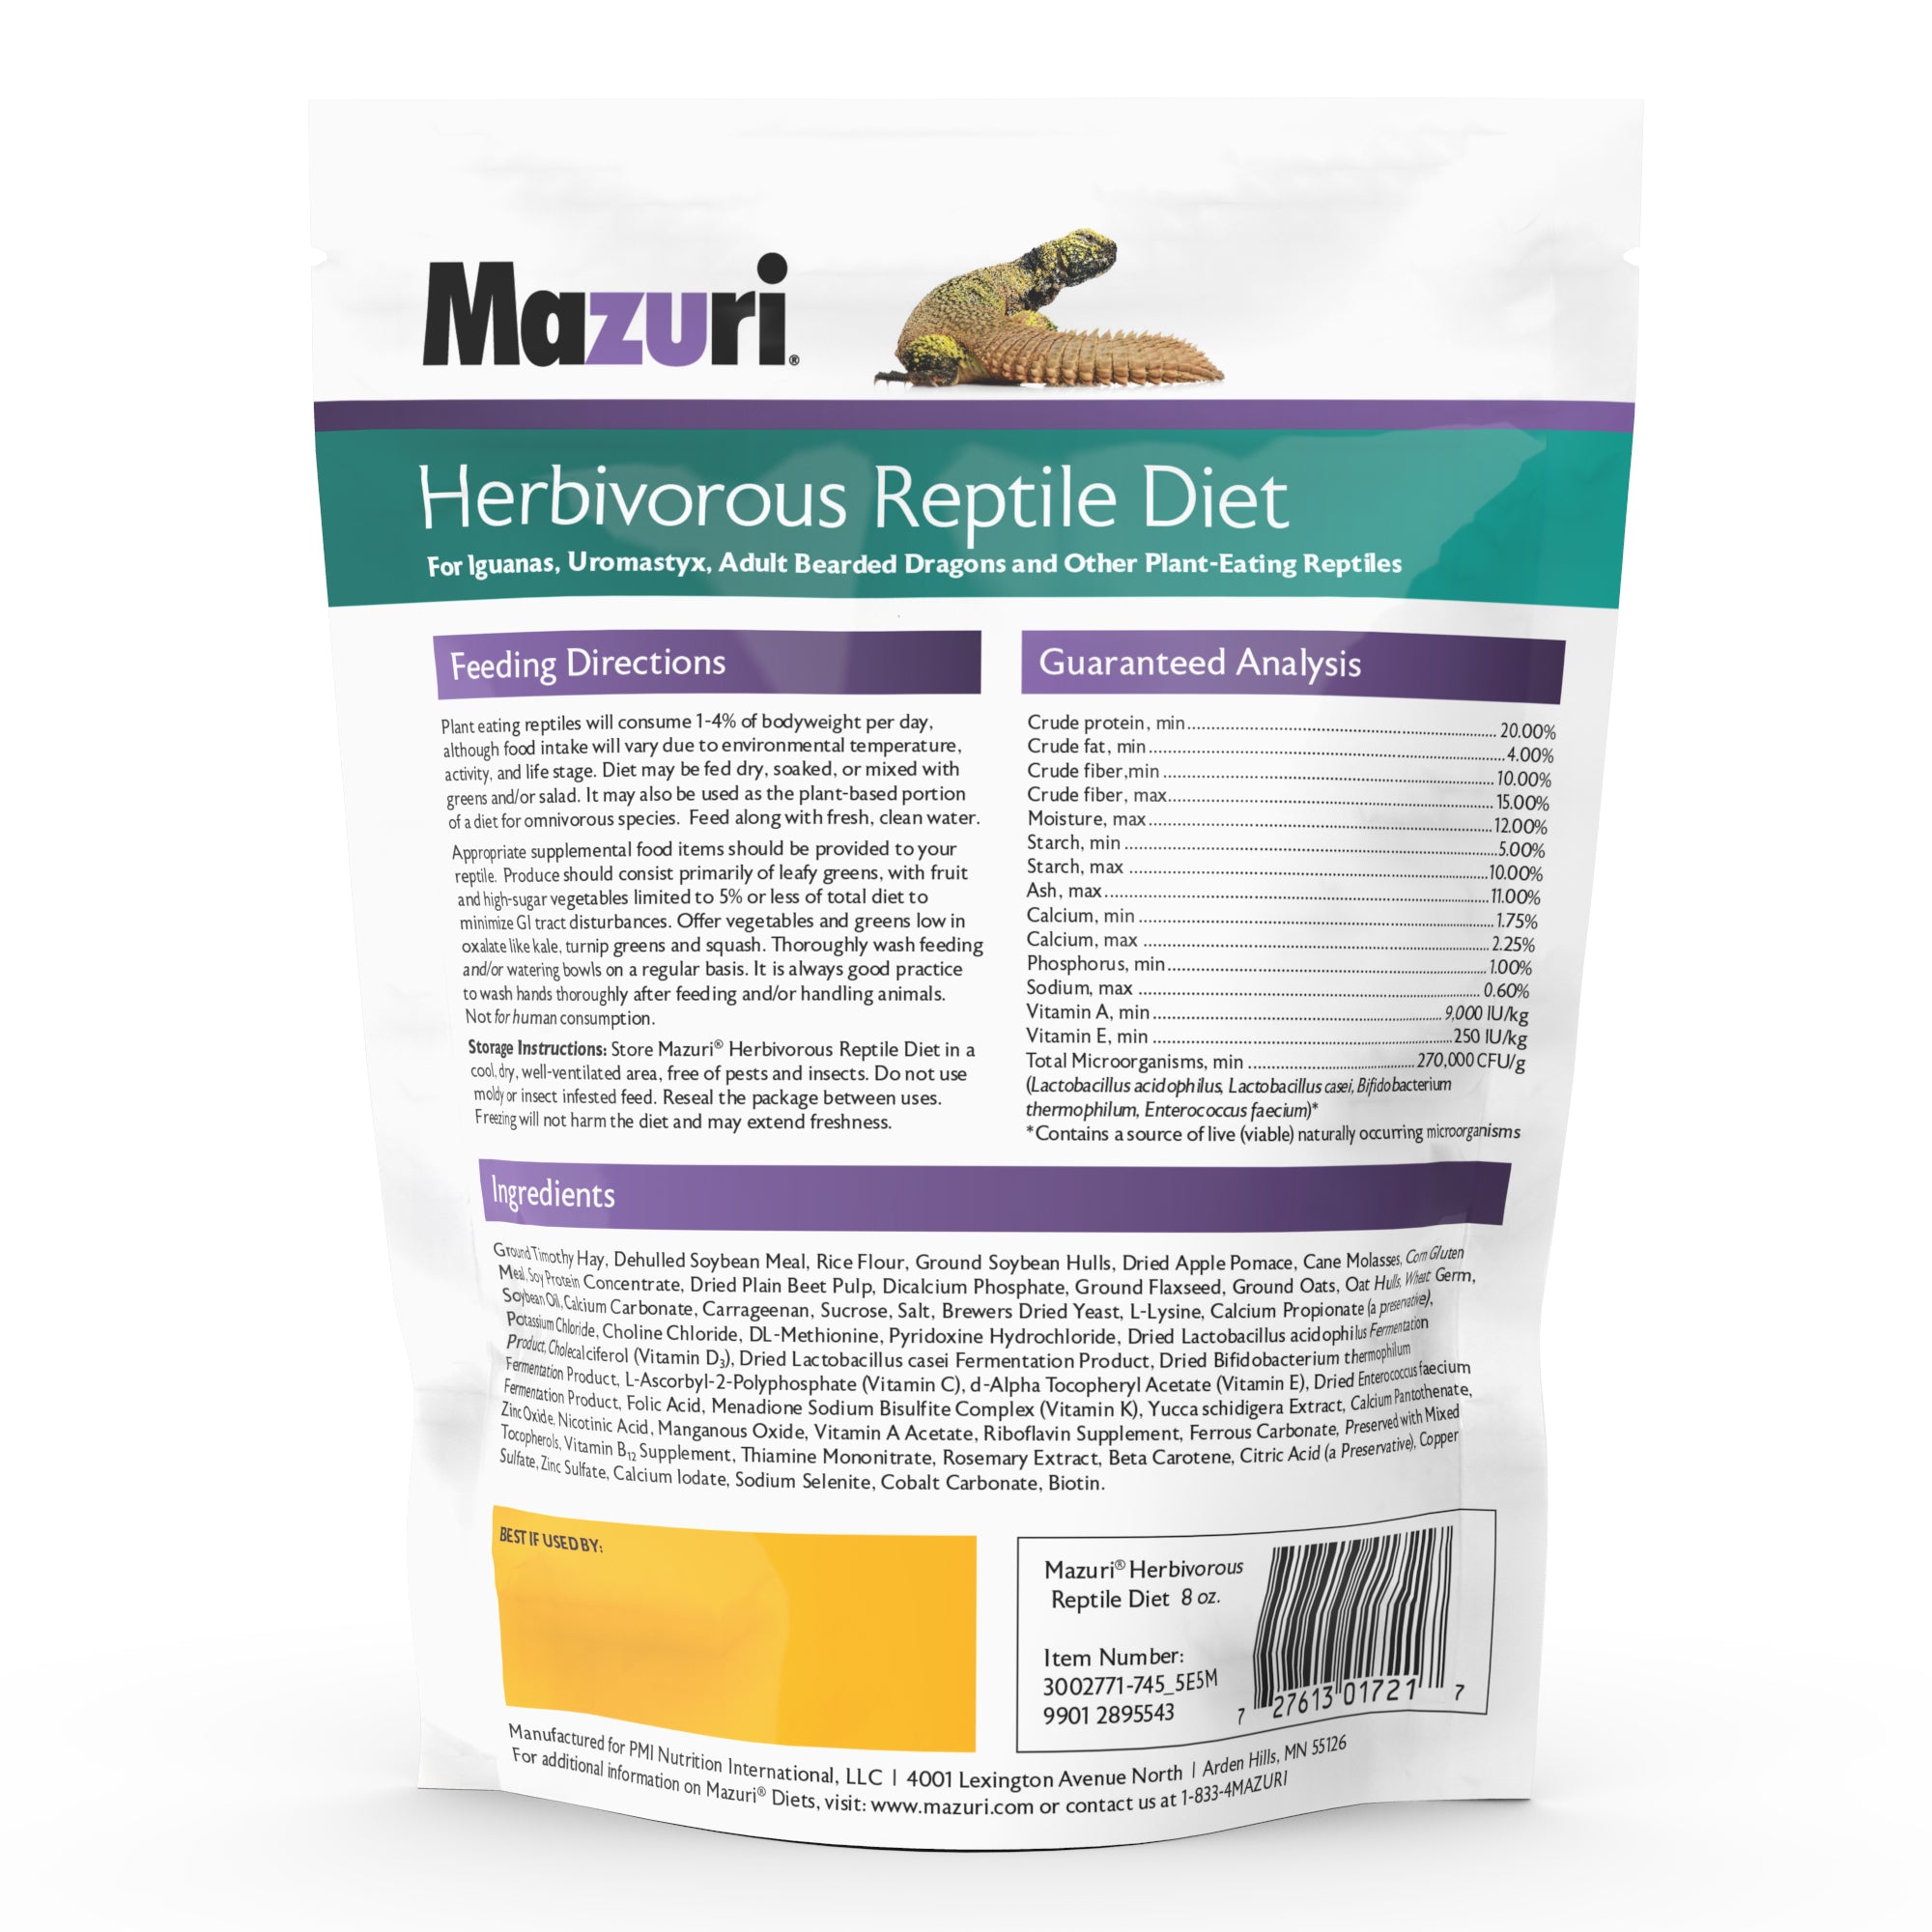 Back View of Herbivorous Reptile Diet 8 oz Pouch